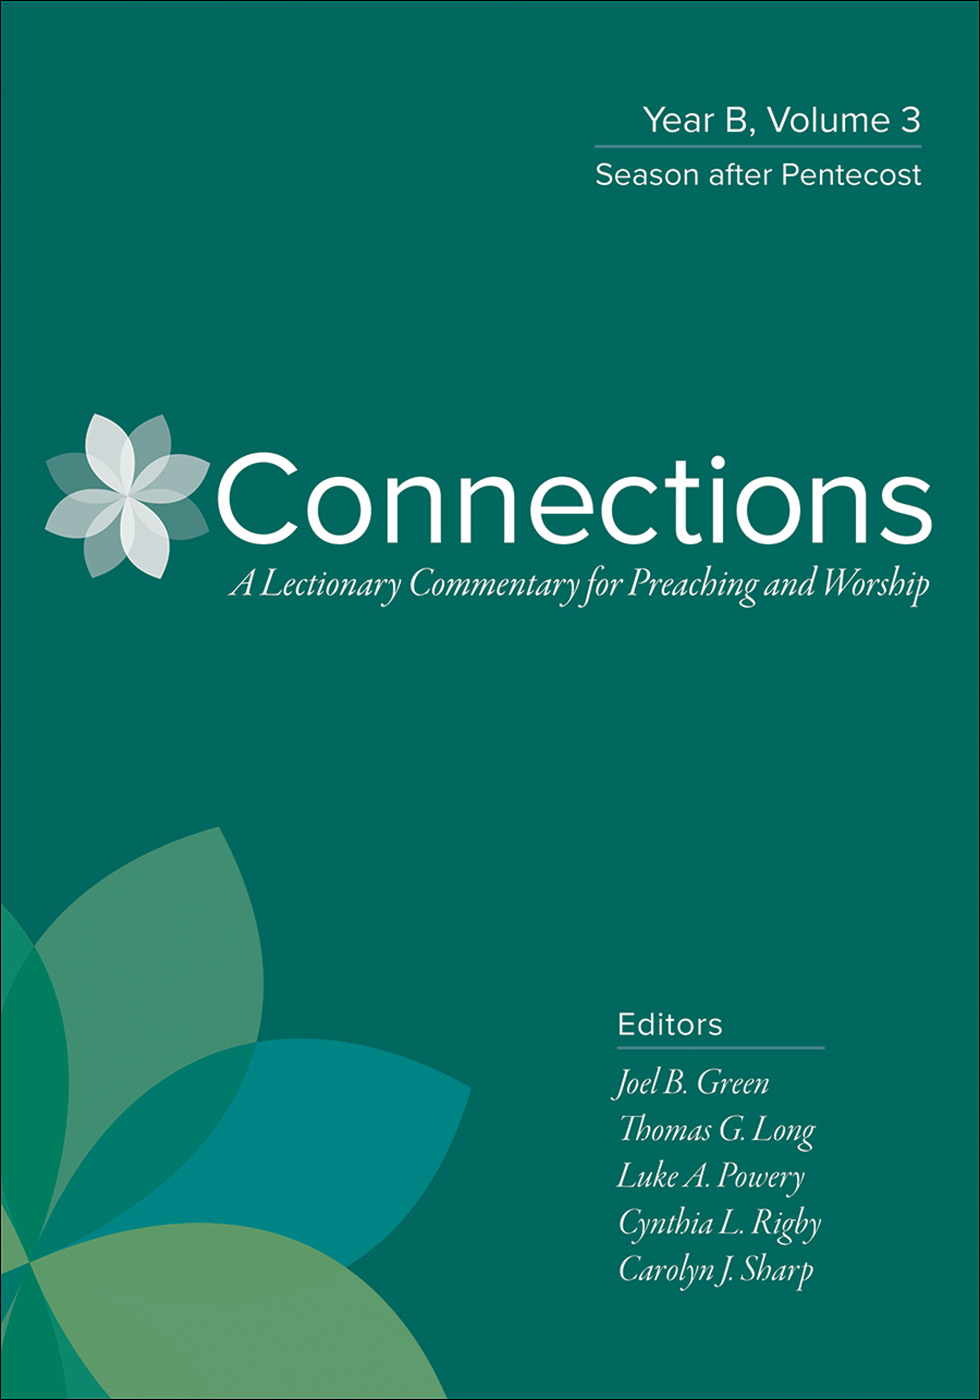 Connections: Year B, Volume 3